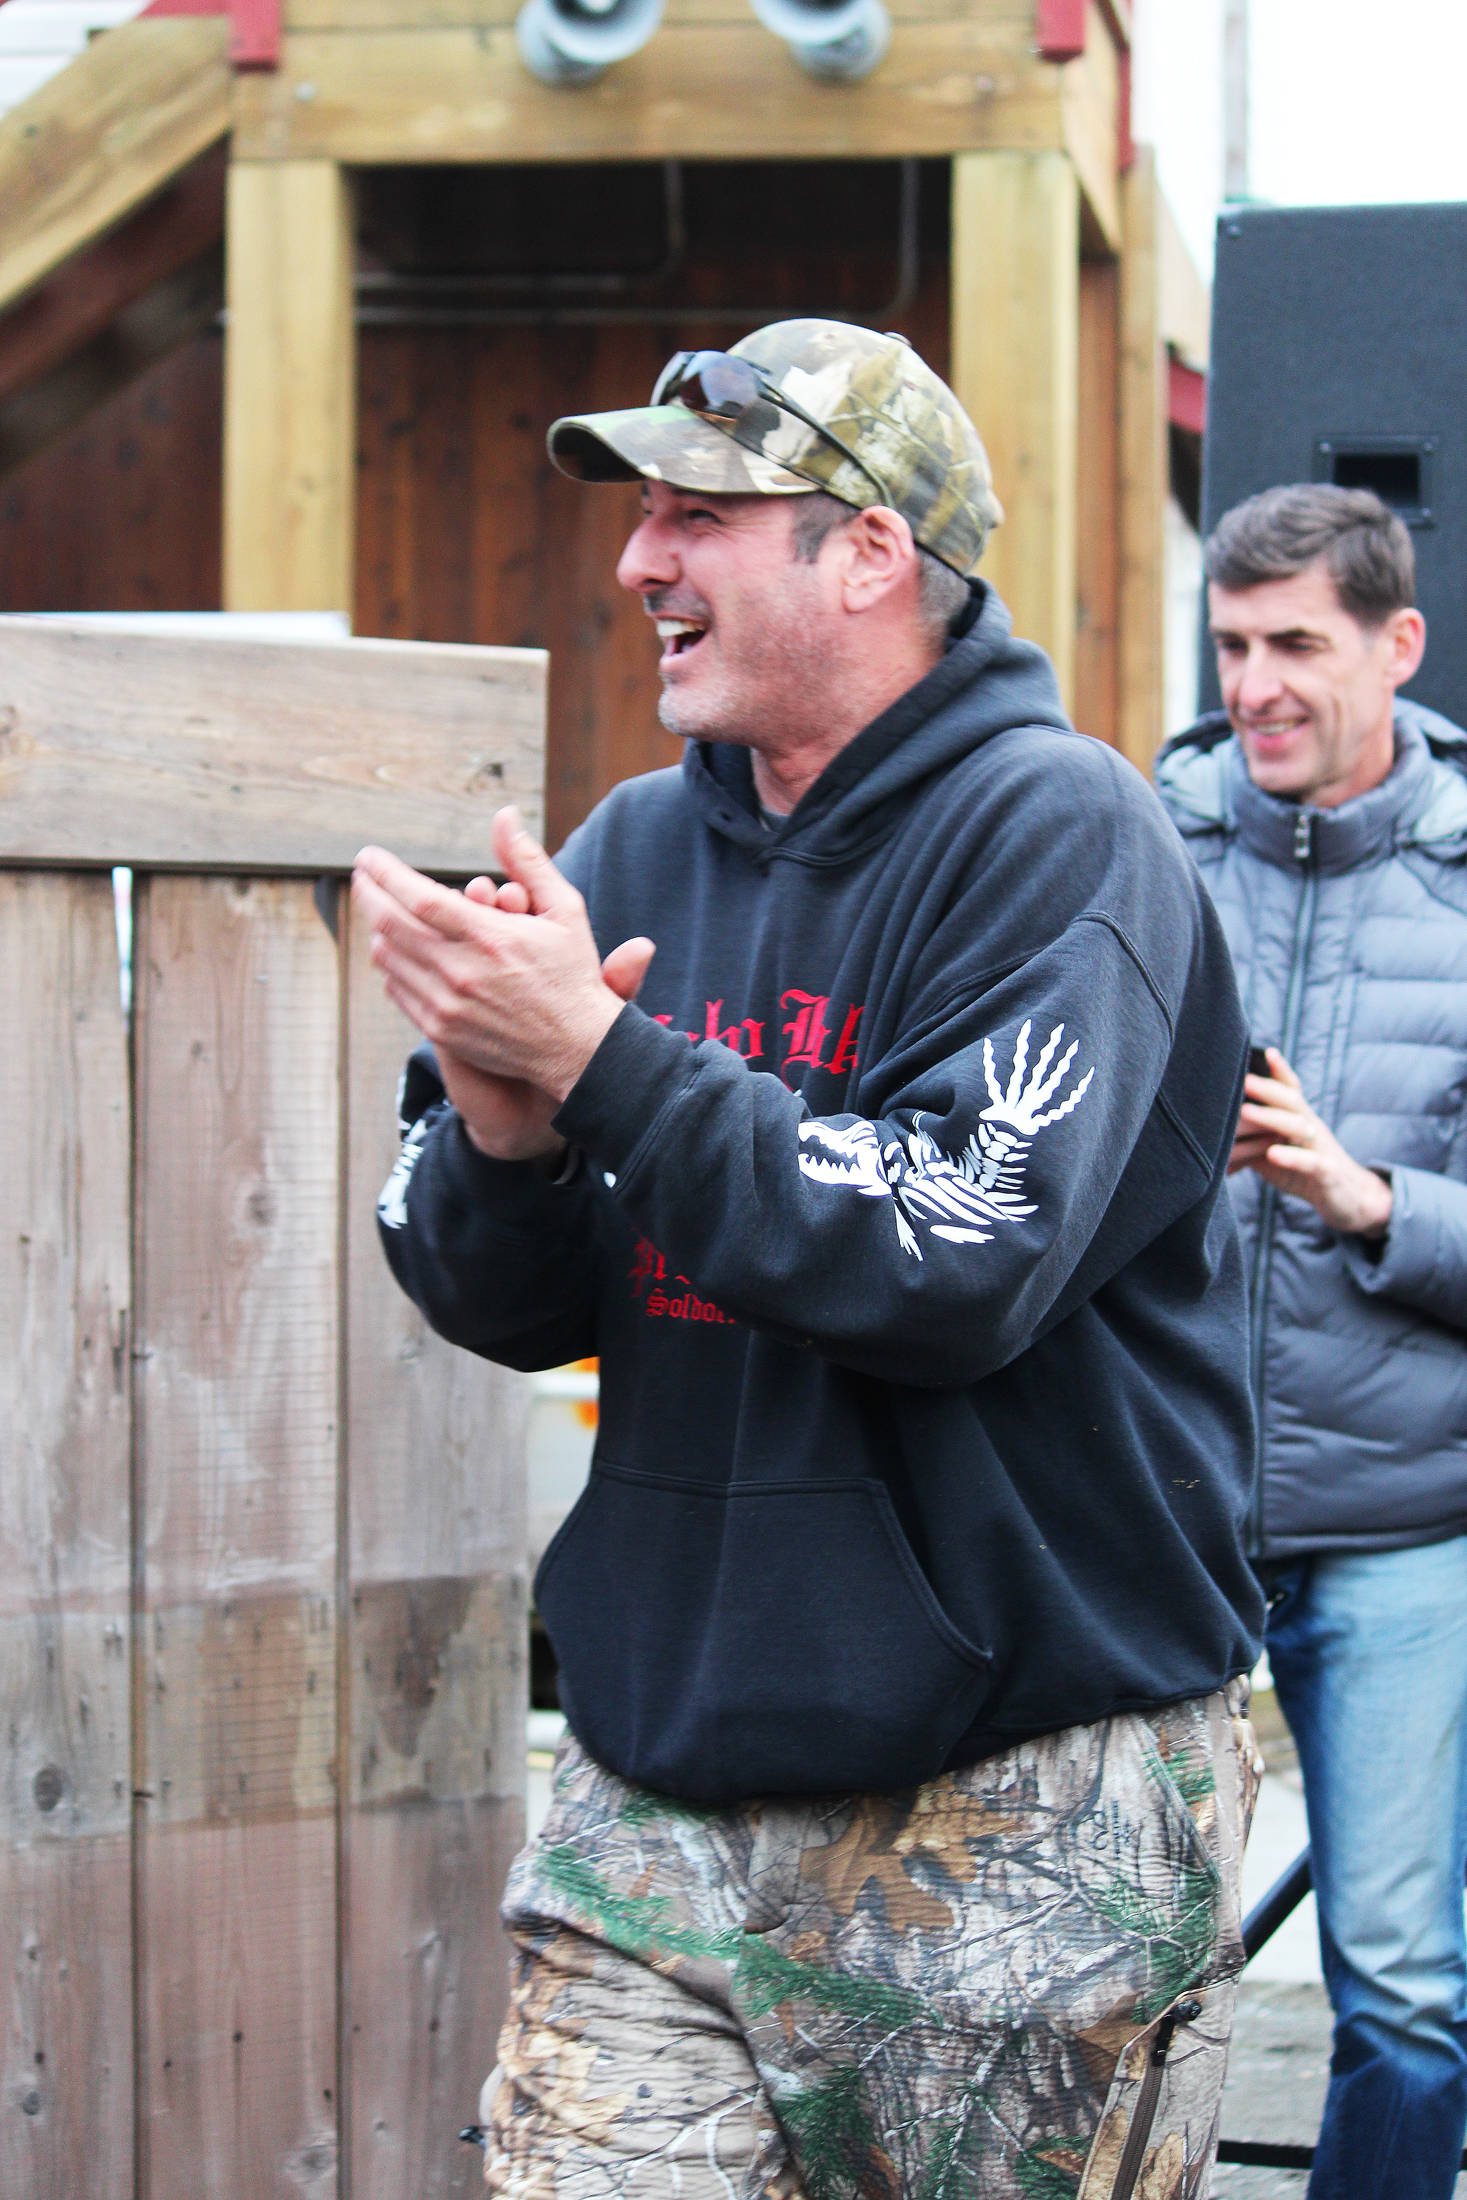 Chad Webb accepts his second place award for his 25.44-pound king salmon Saturday, March 23, 2019 at the Homer Winter King Salmon Tournament in Homer, Alaska. (Photo by Megan Pacer/Homer News)